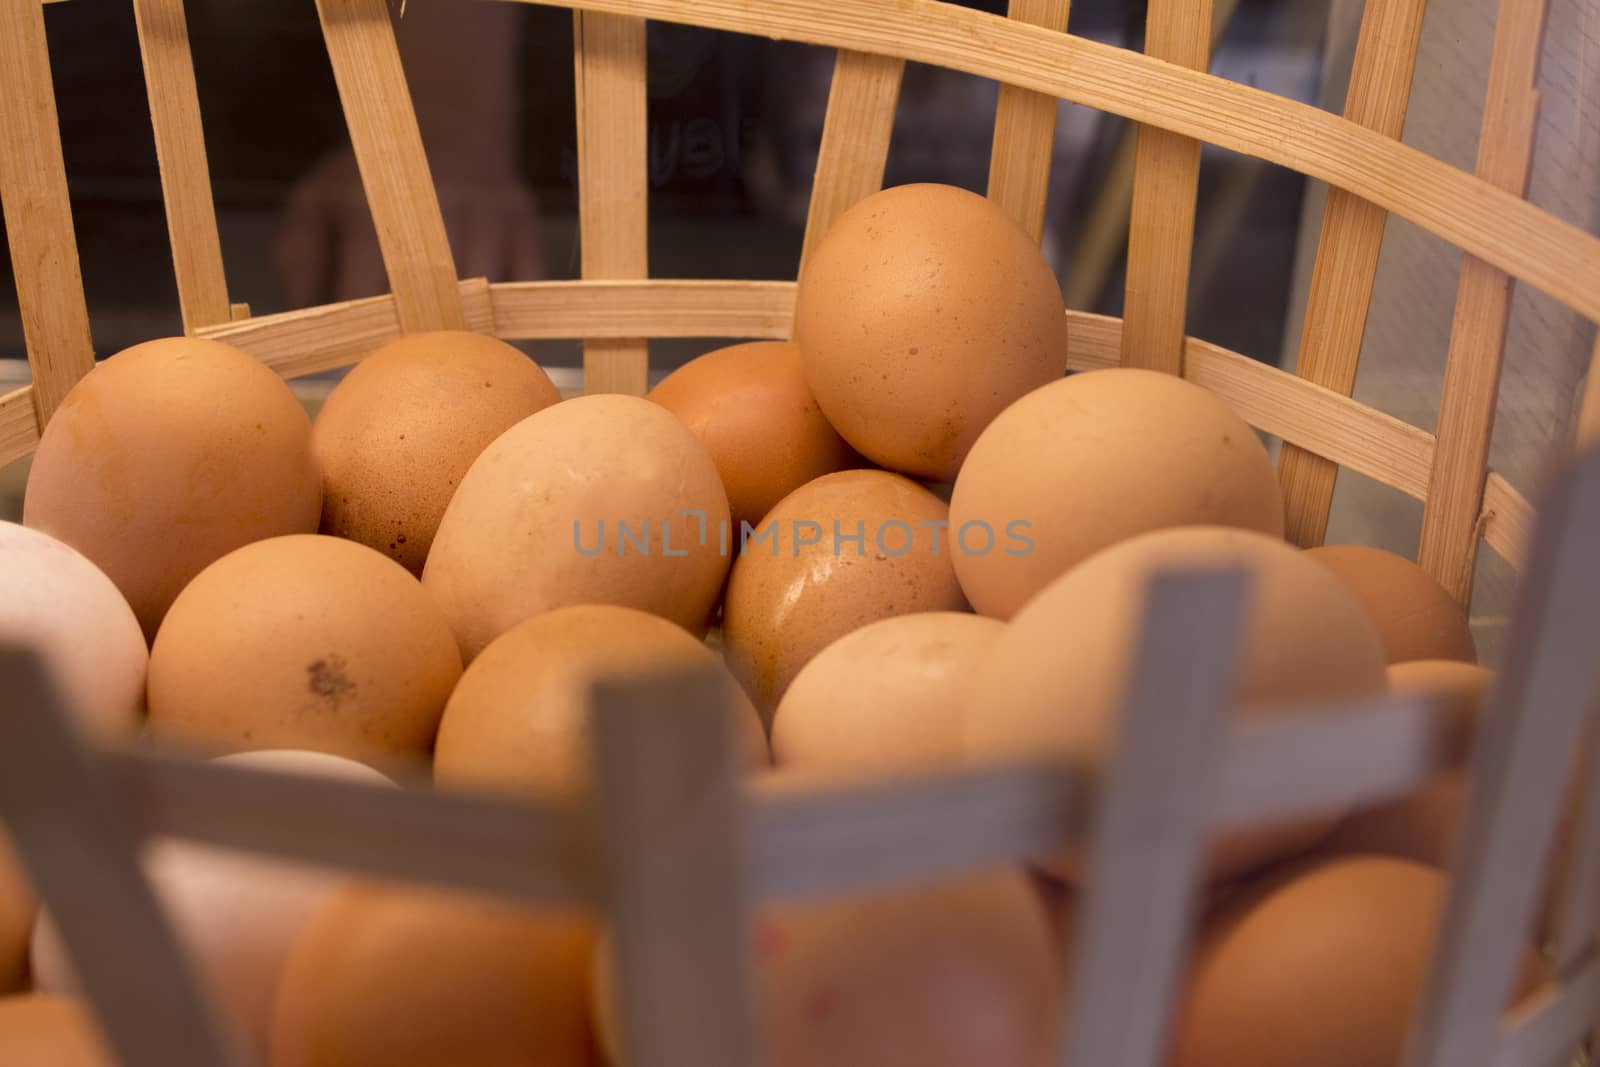 Basket full of white and brown eggs  by GemaIbarra